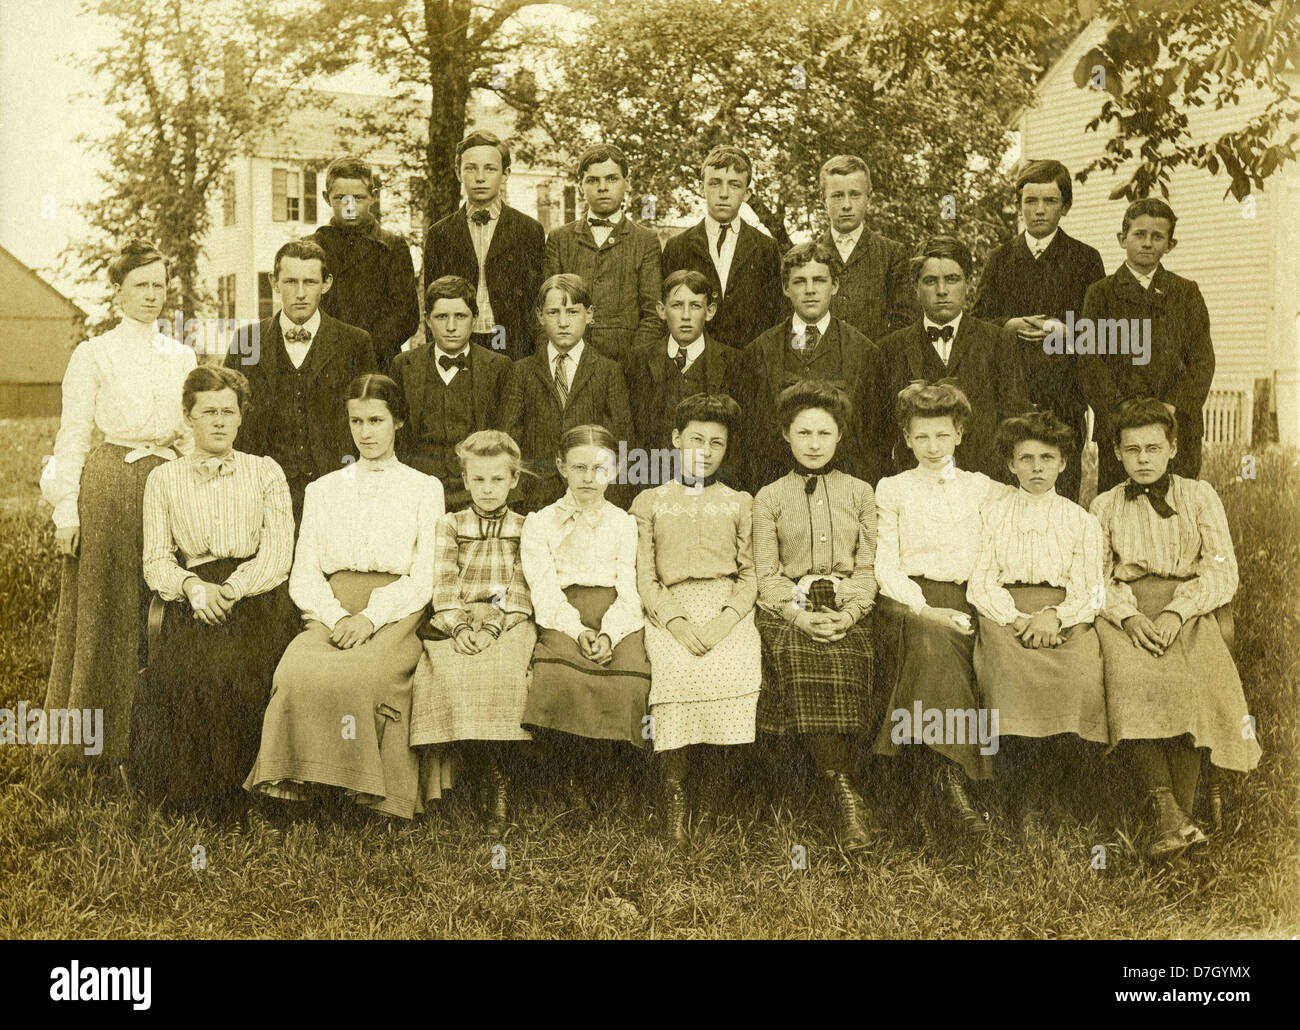 Circa 1900 school photo, showing a group of schoolboys and girls aged 10-14 years old. Stock Photo